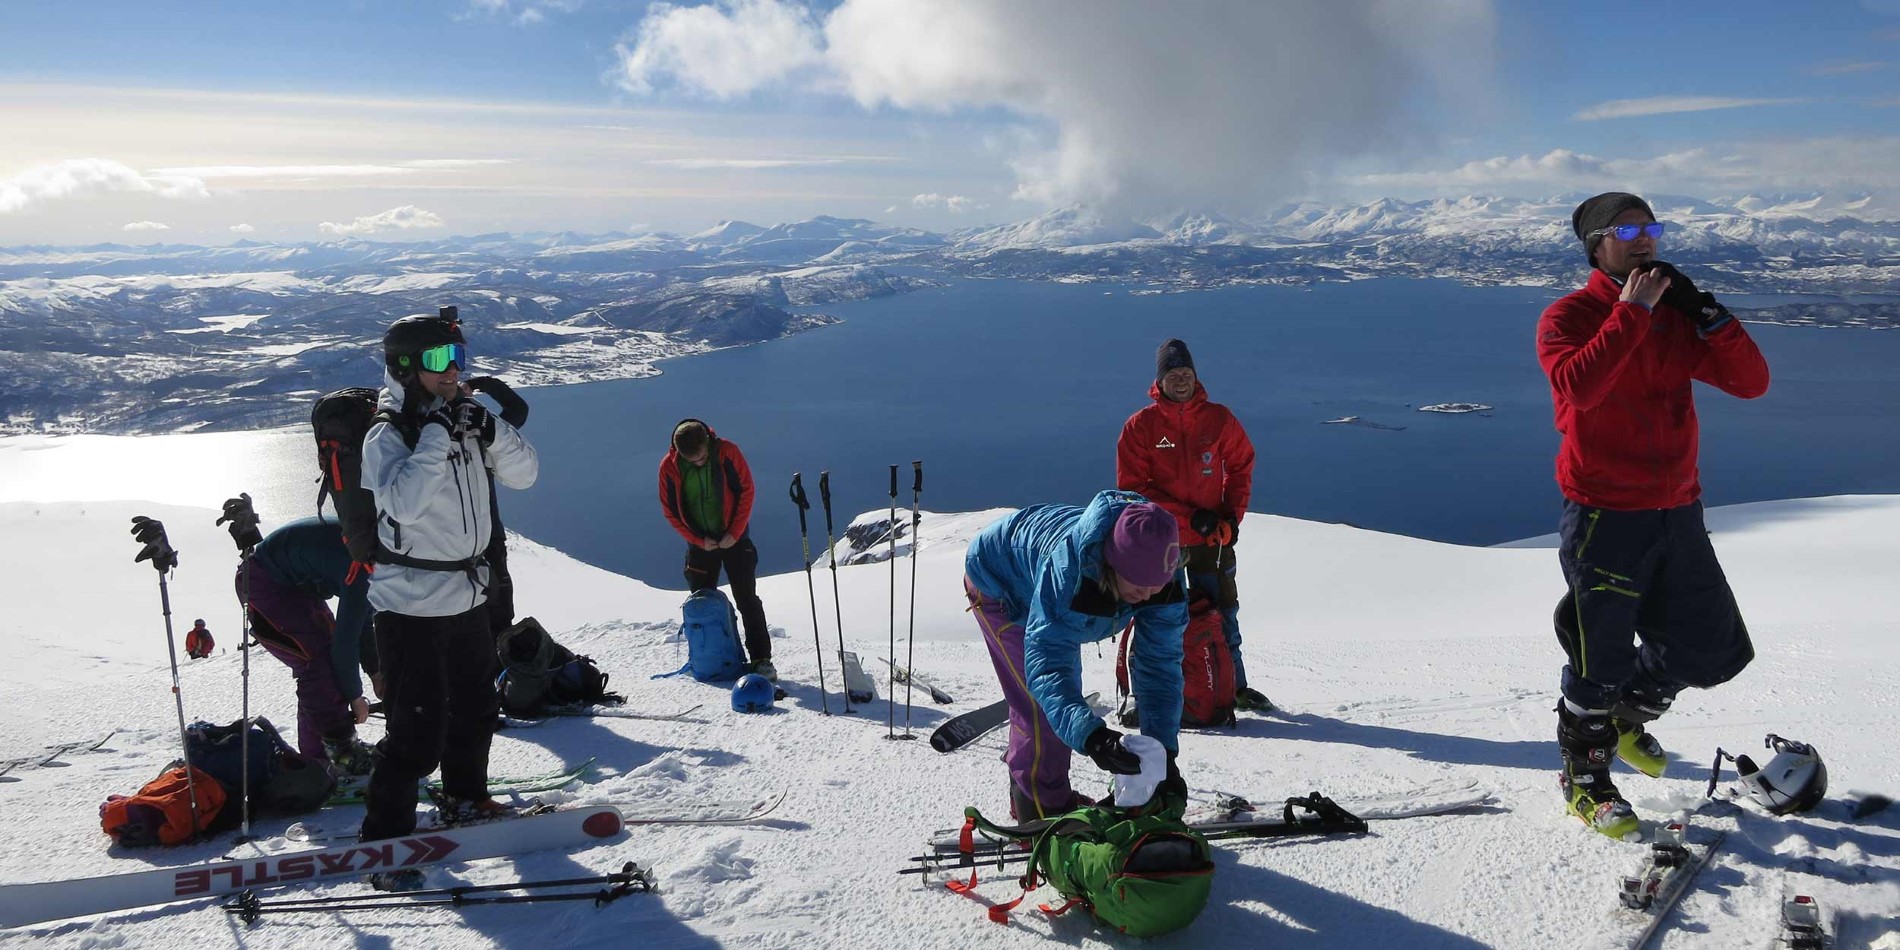 A group of people riding skis on top of a snow covered mountain